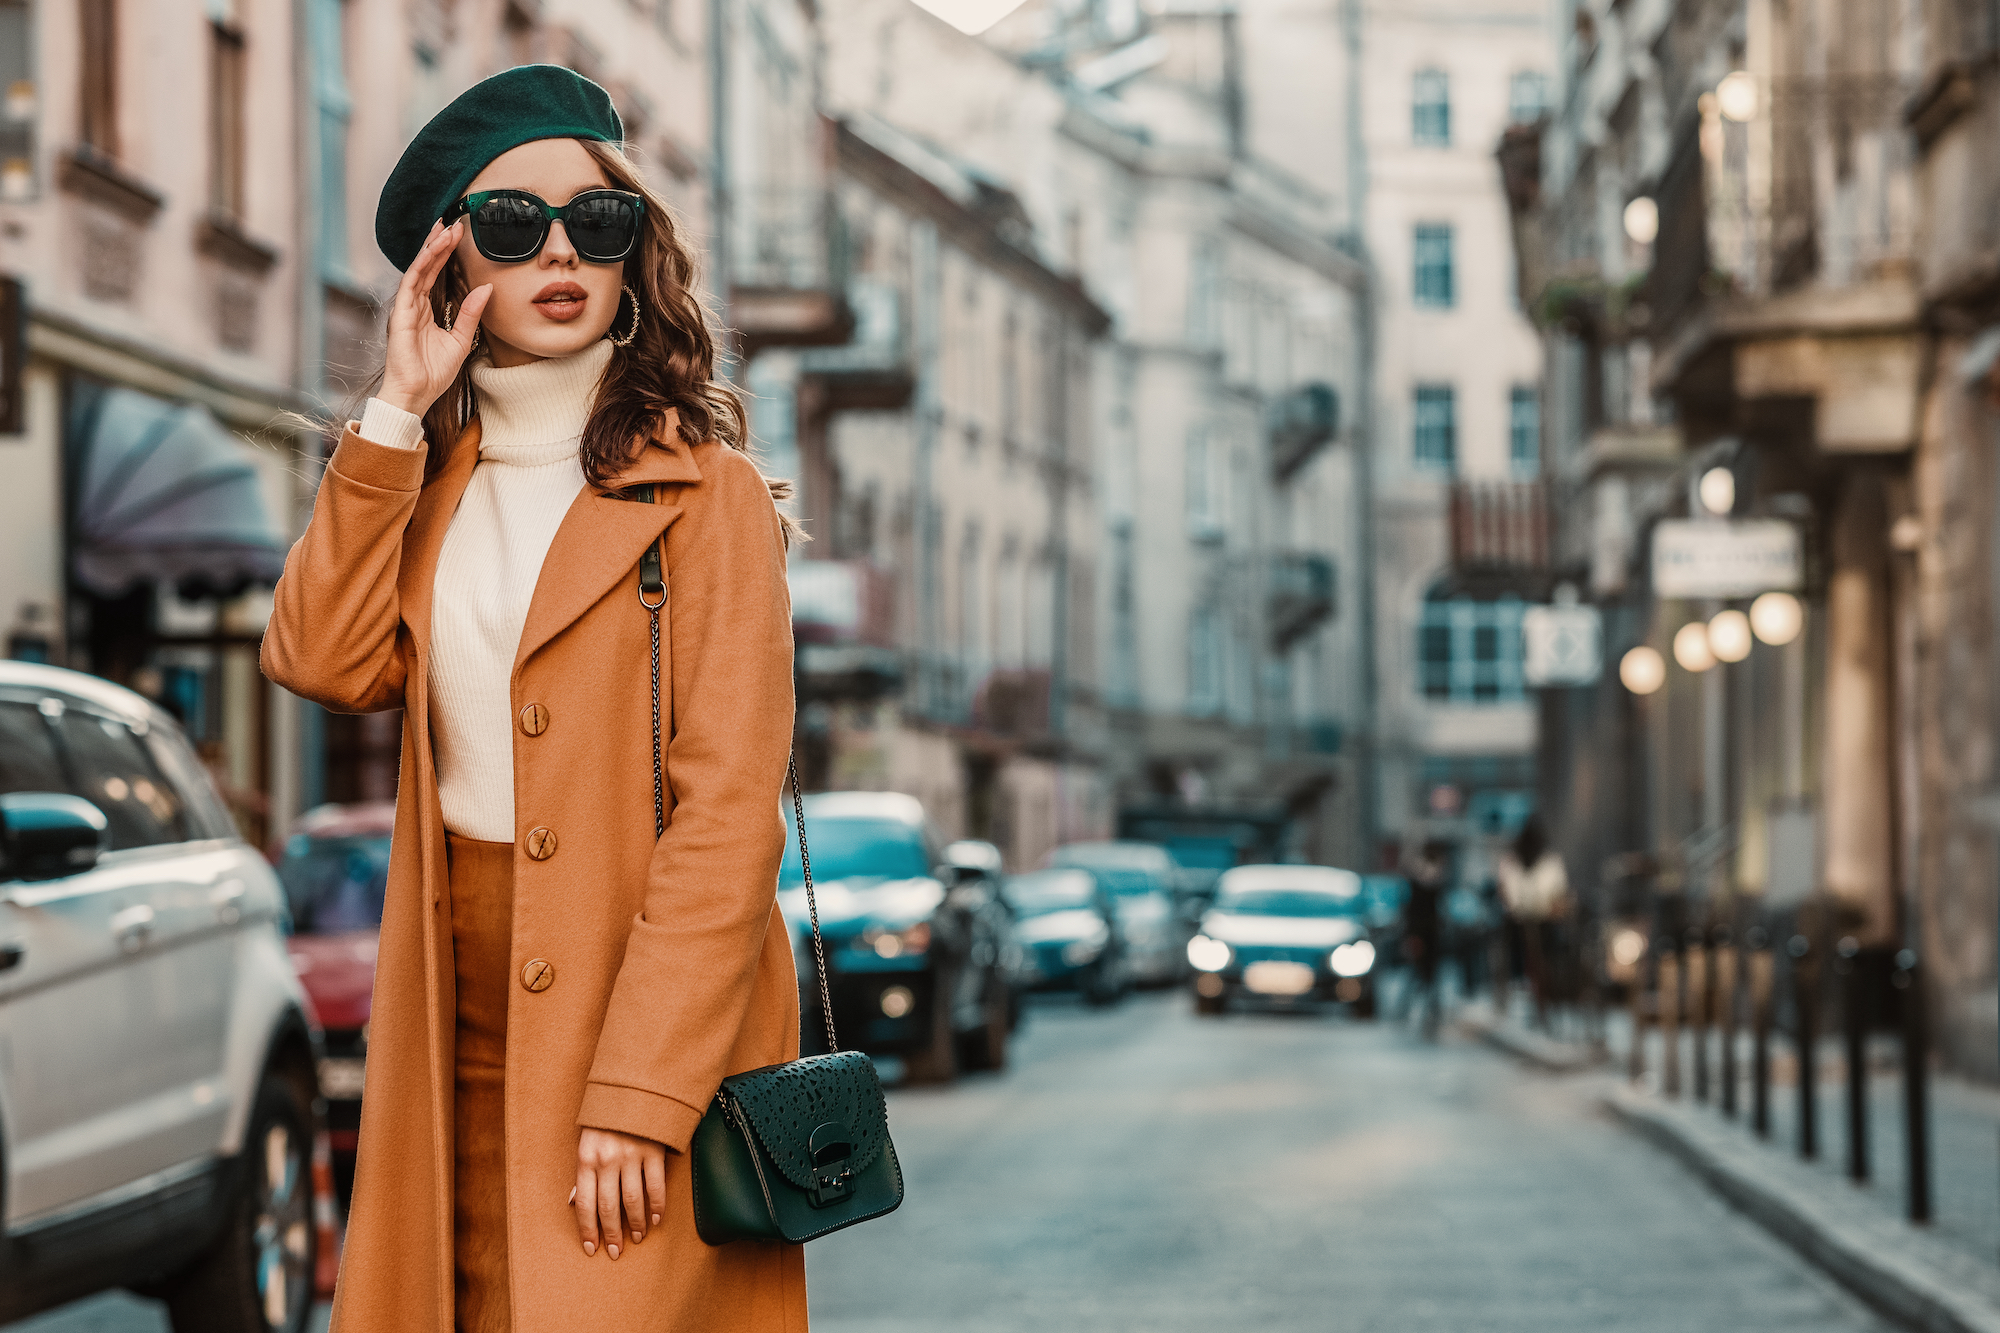 15 Fashion Pieces to Help Master City Girl Fall Style